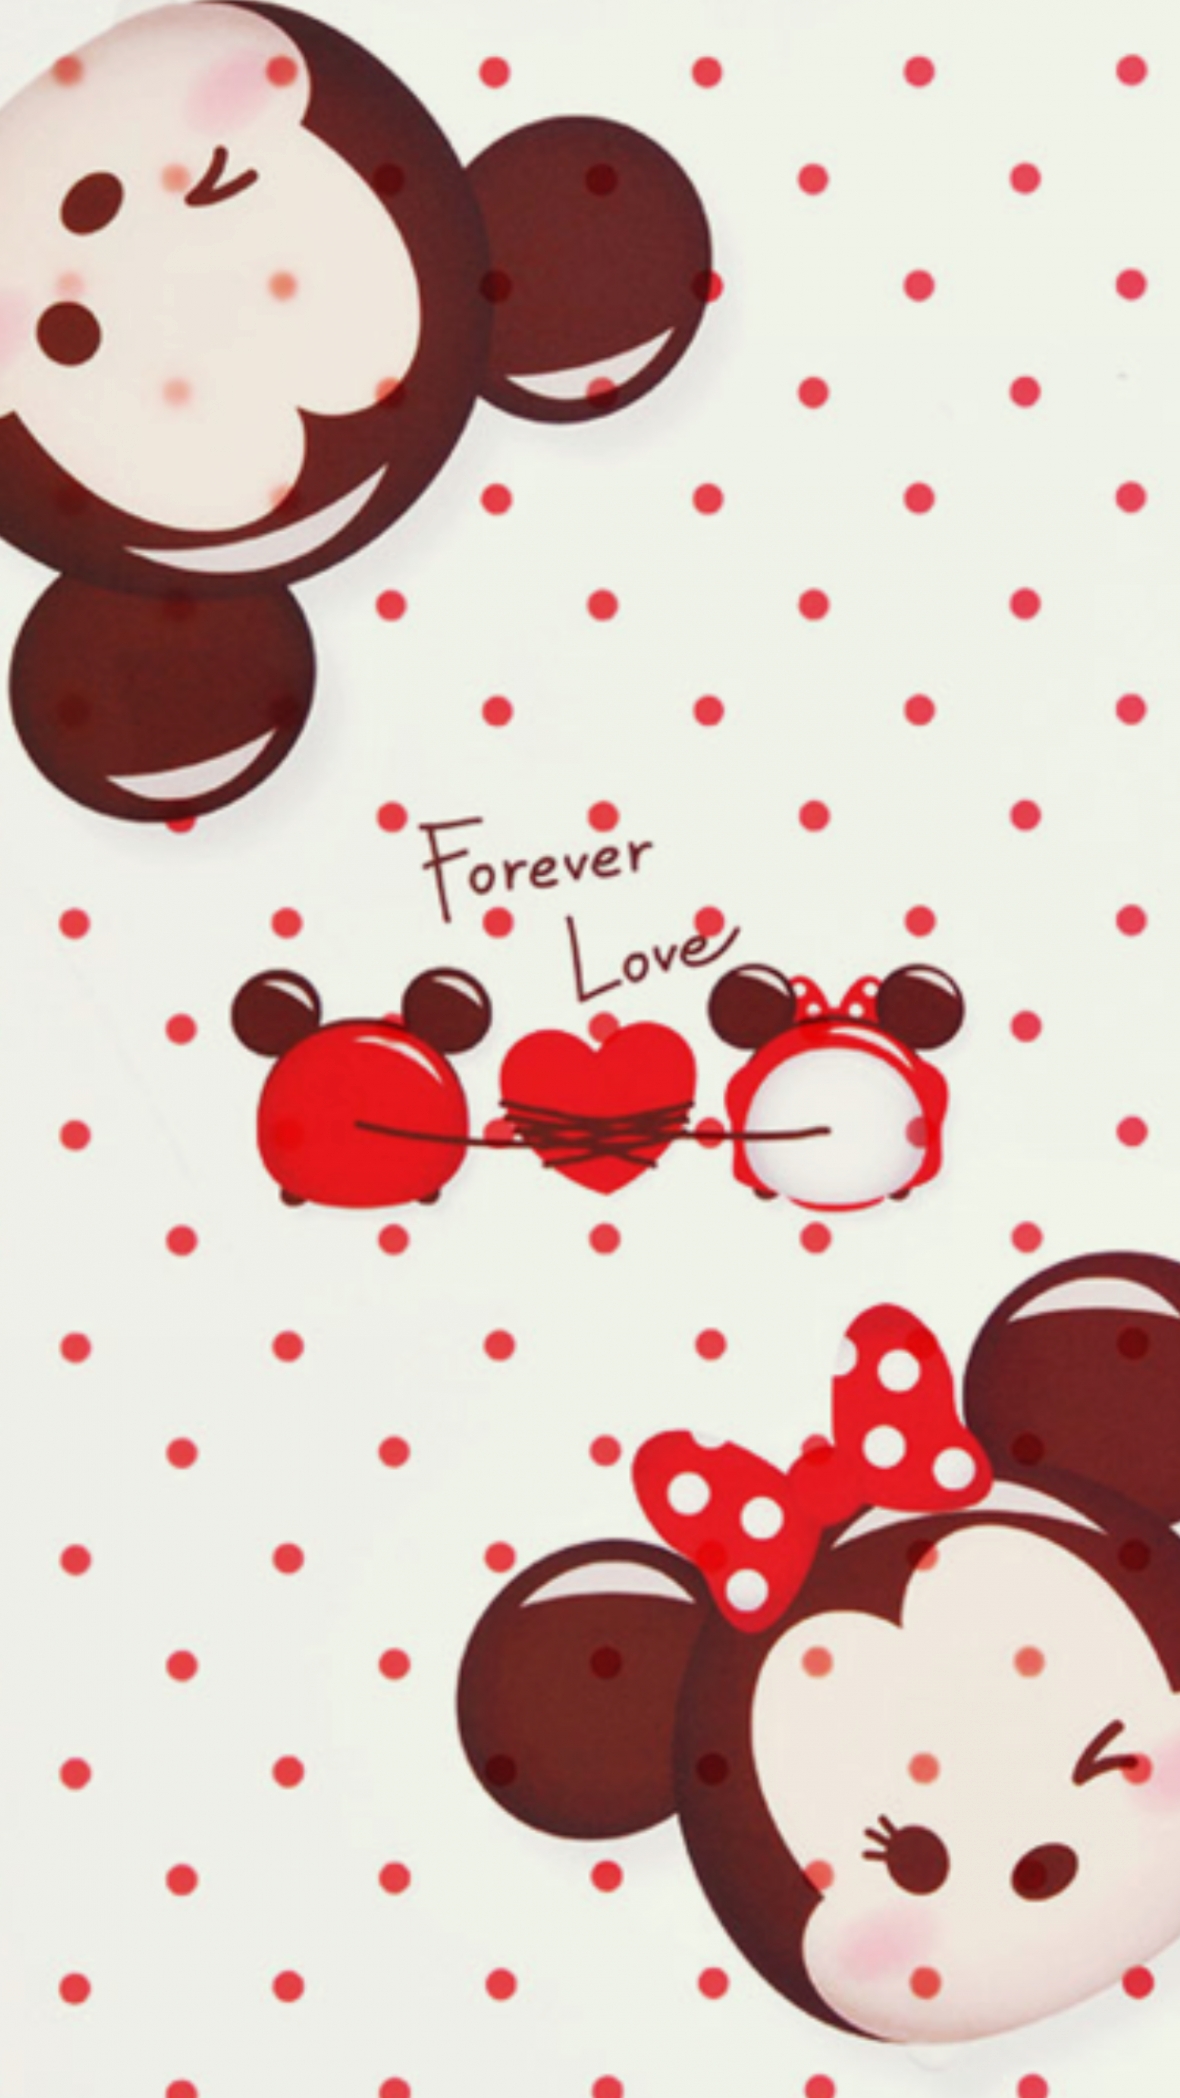 Mickey Mouse Tumblr Wallpapers